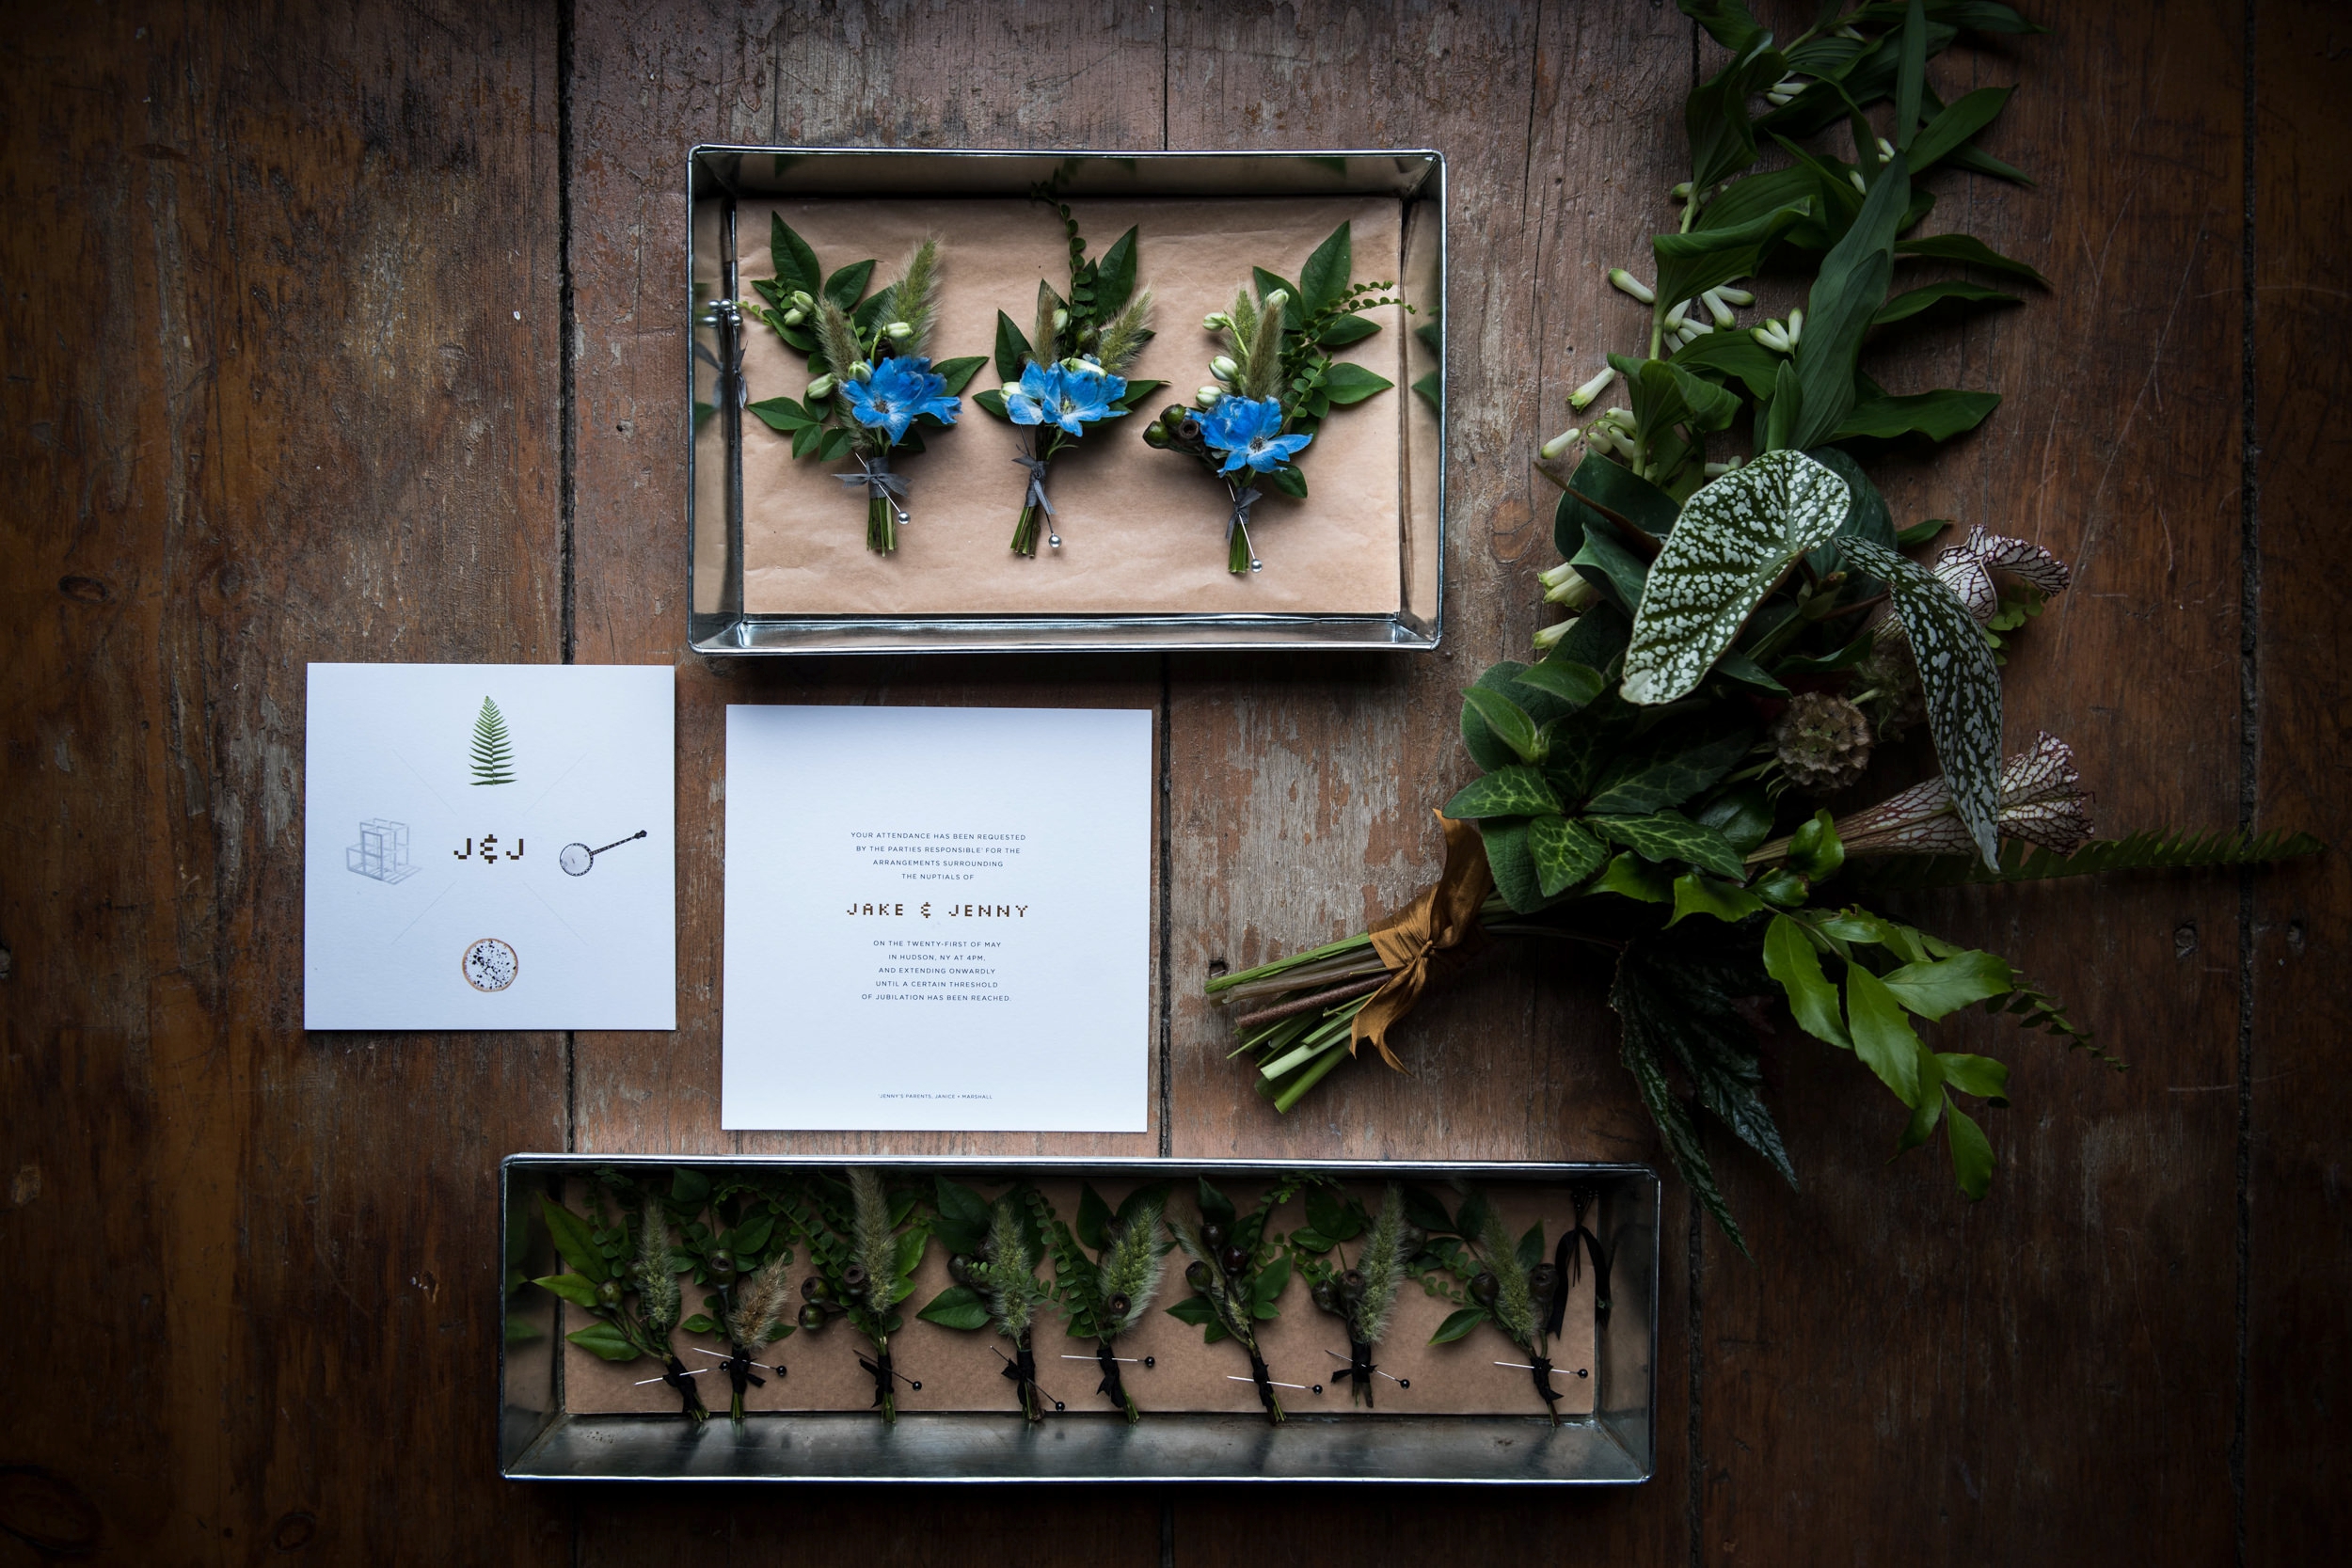 A Hudson Valley wedding invitation card alongside a boutonniere, a bouquet, and greenery on a wooden surface.